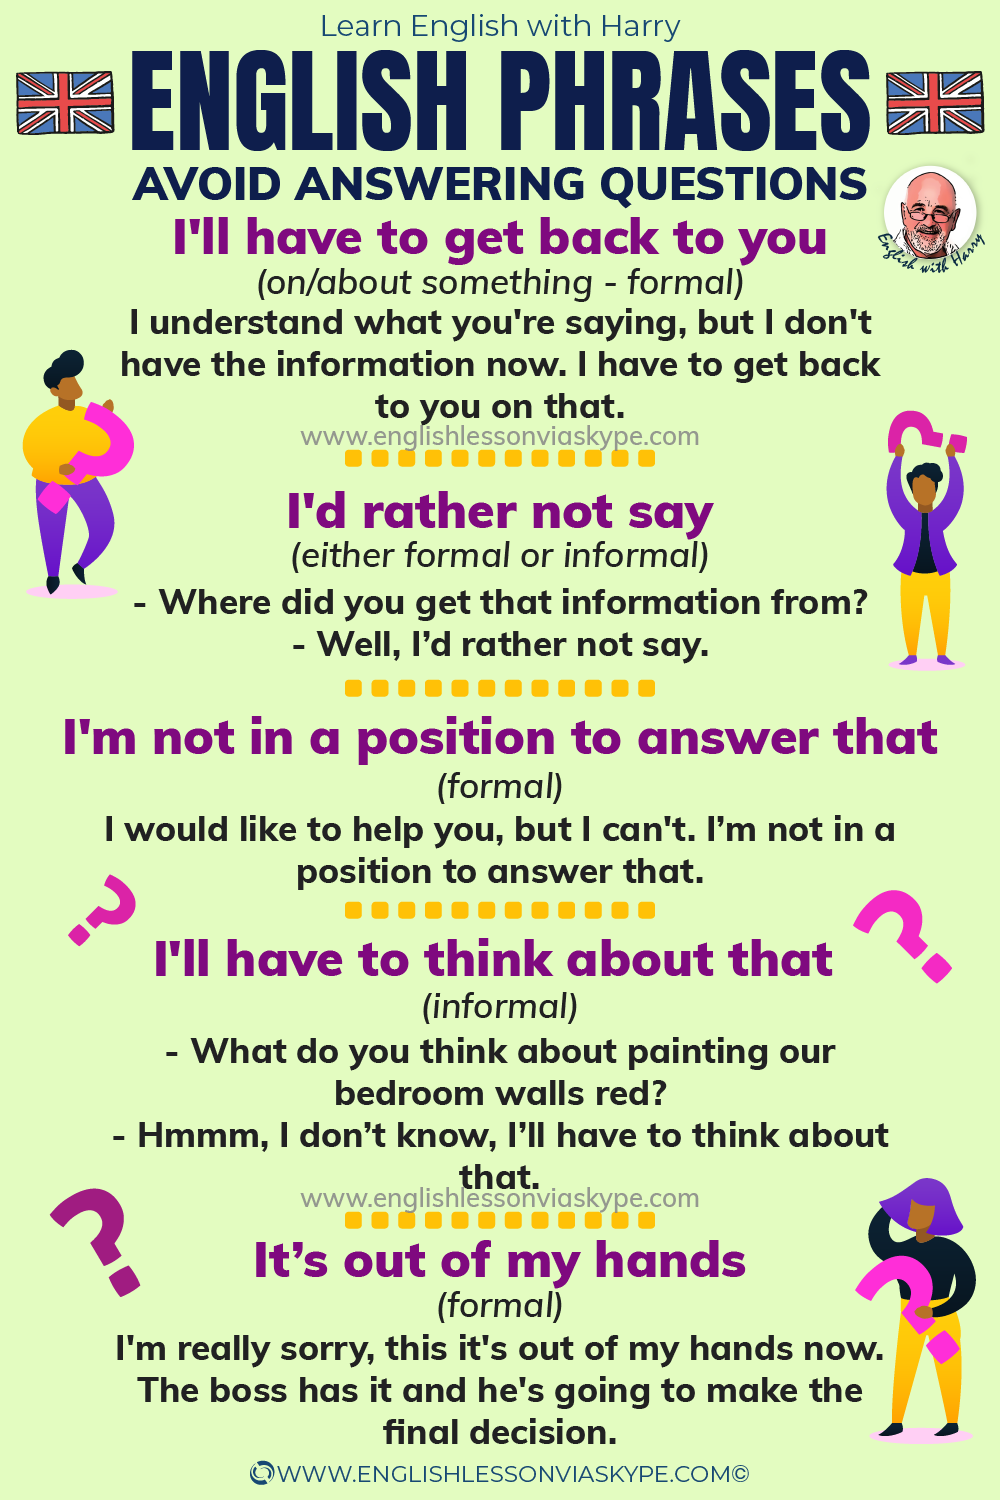 10 English phrases to avoid answering a question. Advanced English learning with www.englishlessonviaskype.com #learnenglish #englishlessons #EnglishTeacher #vocabulary #ingles #อังกฤษ #английский #aprenderingles #english #cursodeingles #учианглийский #vocabulário #dicasdeingles #learningenglish #ingilizce #englishgrammar #englishvocabulary #ielts #idiomas